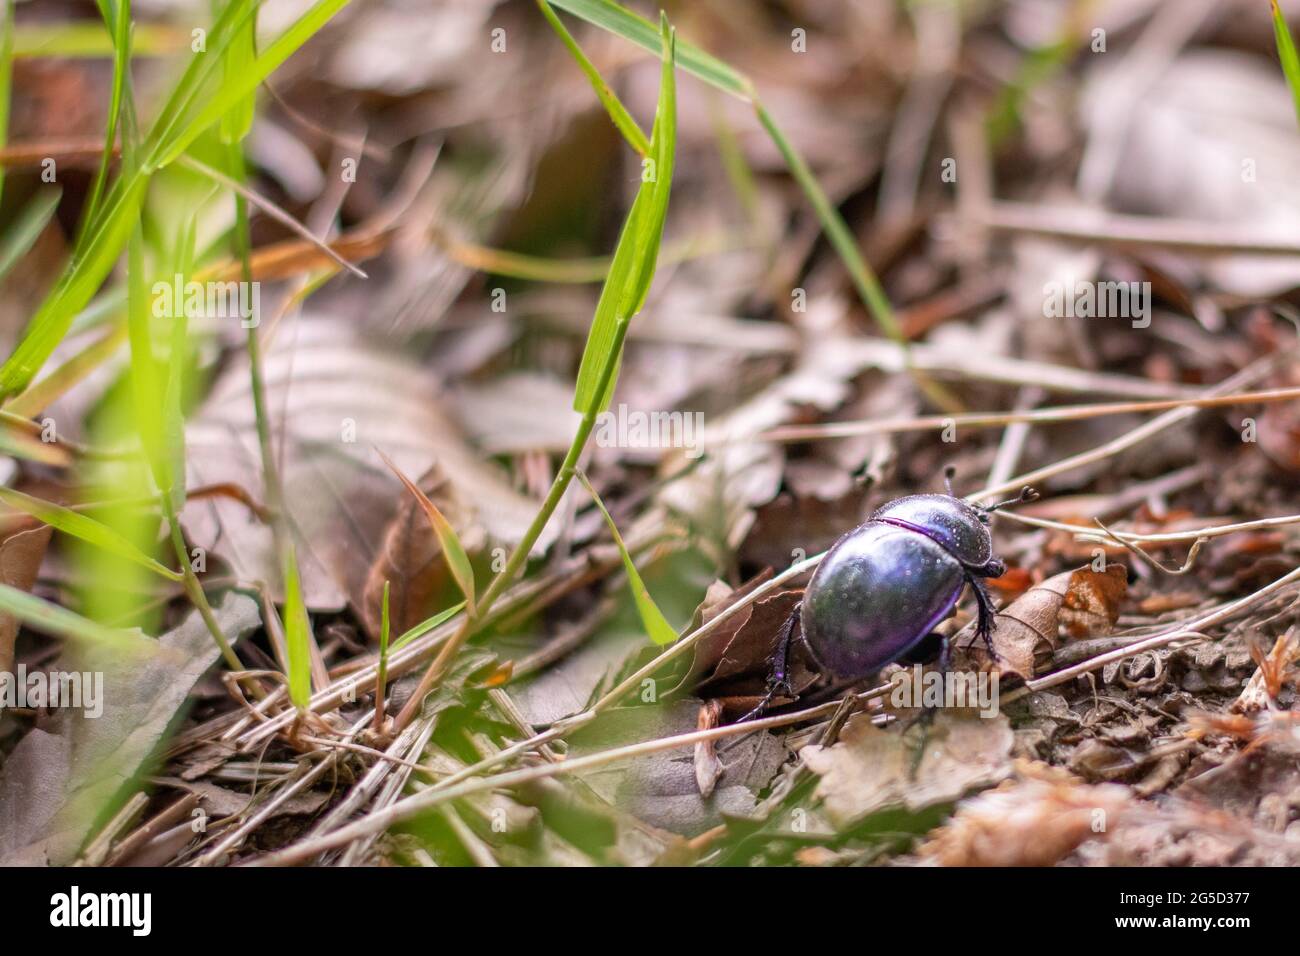 A single dor beetle (Trypocopris vernalis) walking on the ground surrounded by grass and twigs (Veluwe, The Netherlands) Stock Photo